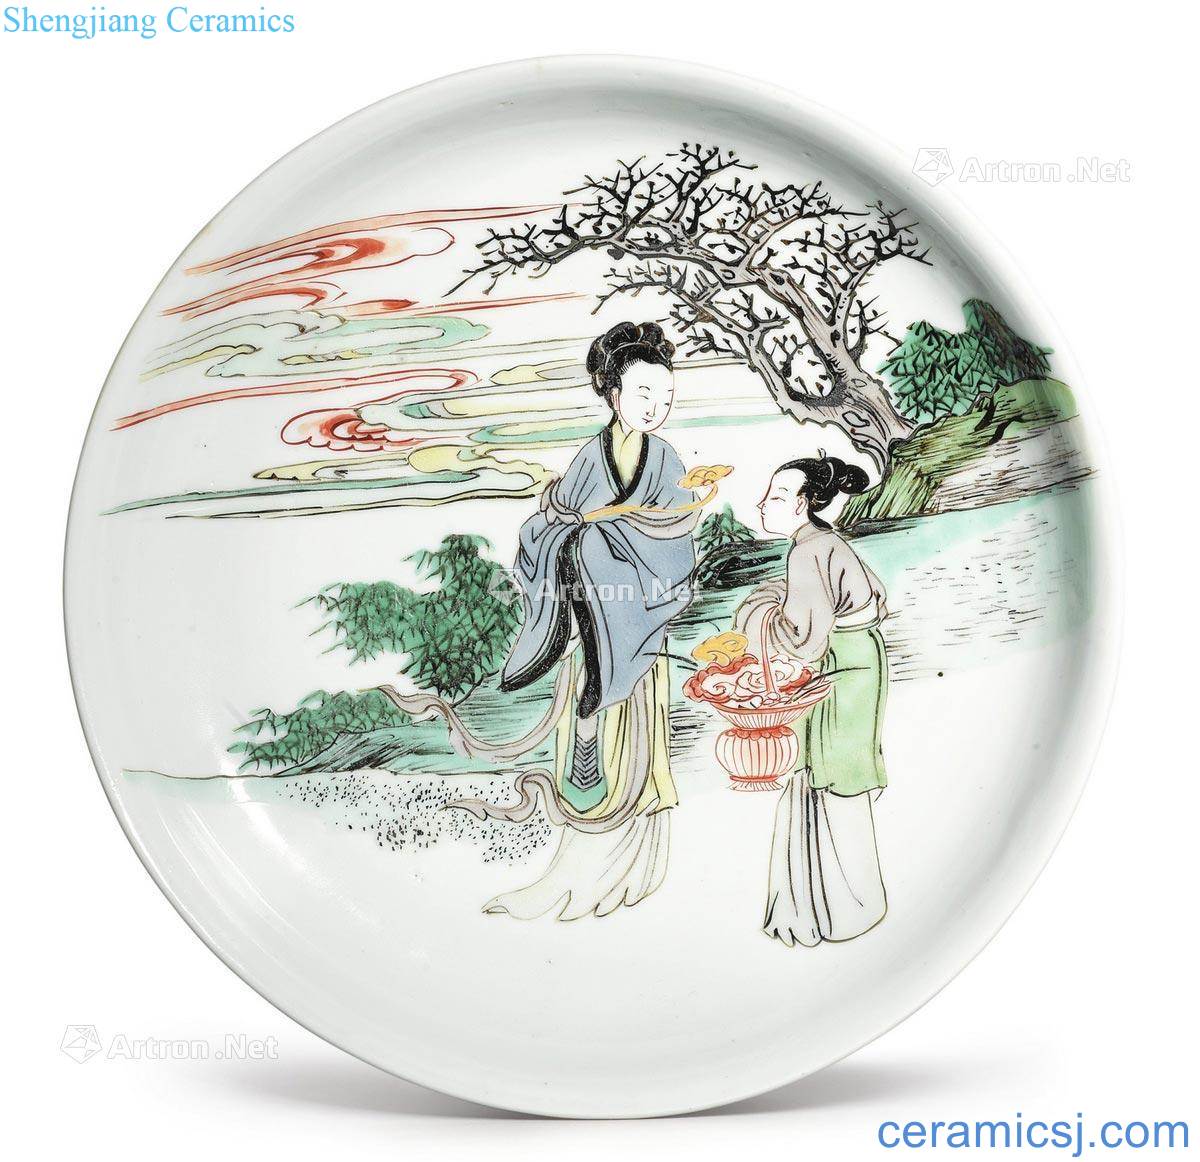 Qing in the eighteenth century Colorful mago offer longevity figure